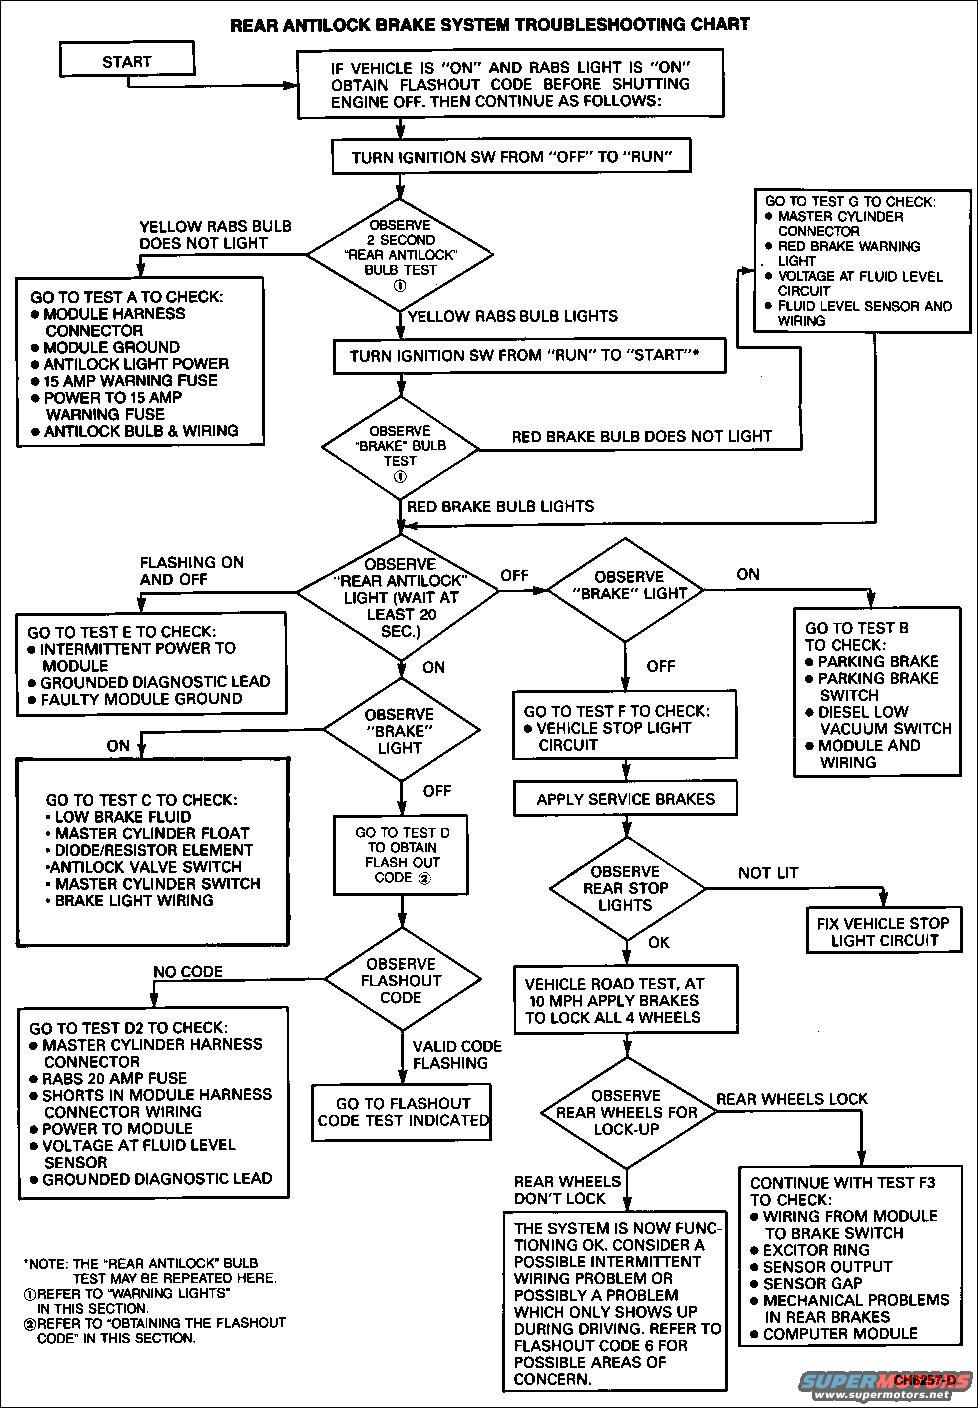 Ford flow charts #1